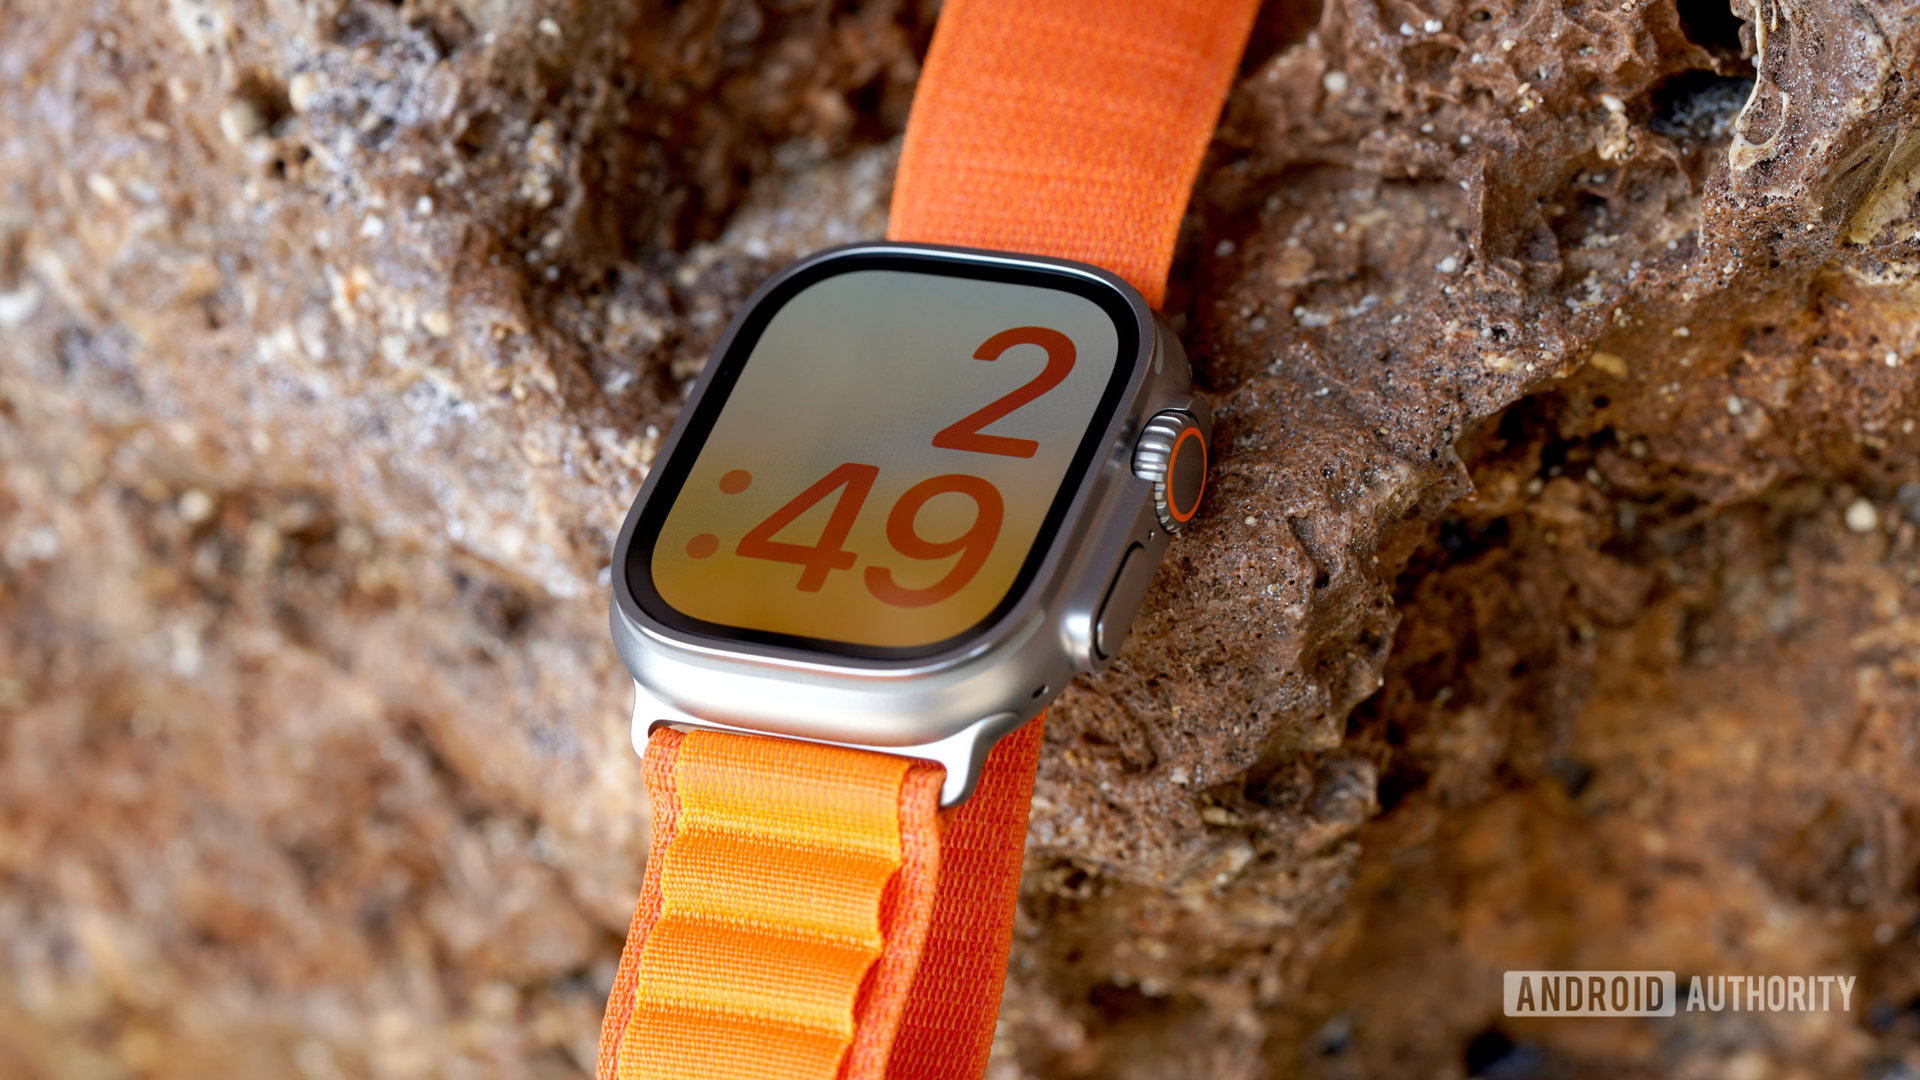 Apple Watch Series 8 Review: New Features, Price, WatchOS 9, Battery Life